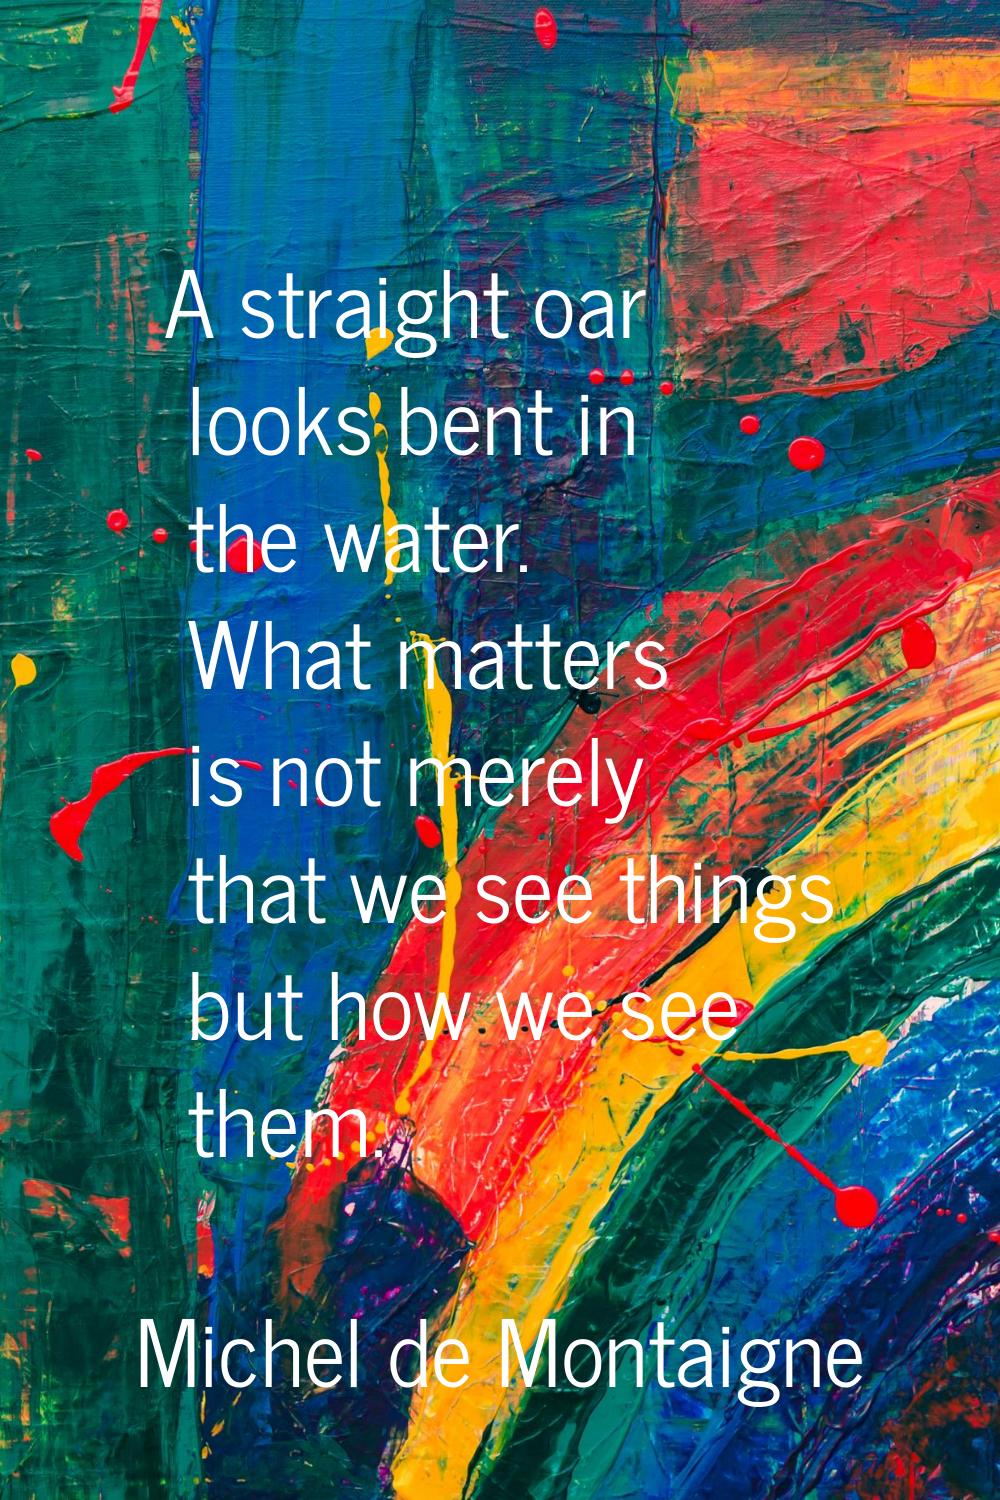 A straight oar looks bent in the water. What matters is not merely that we see things but how we se